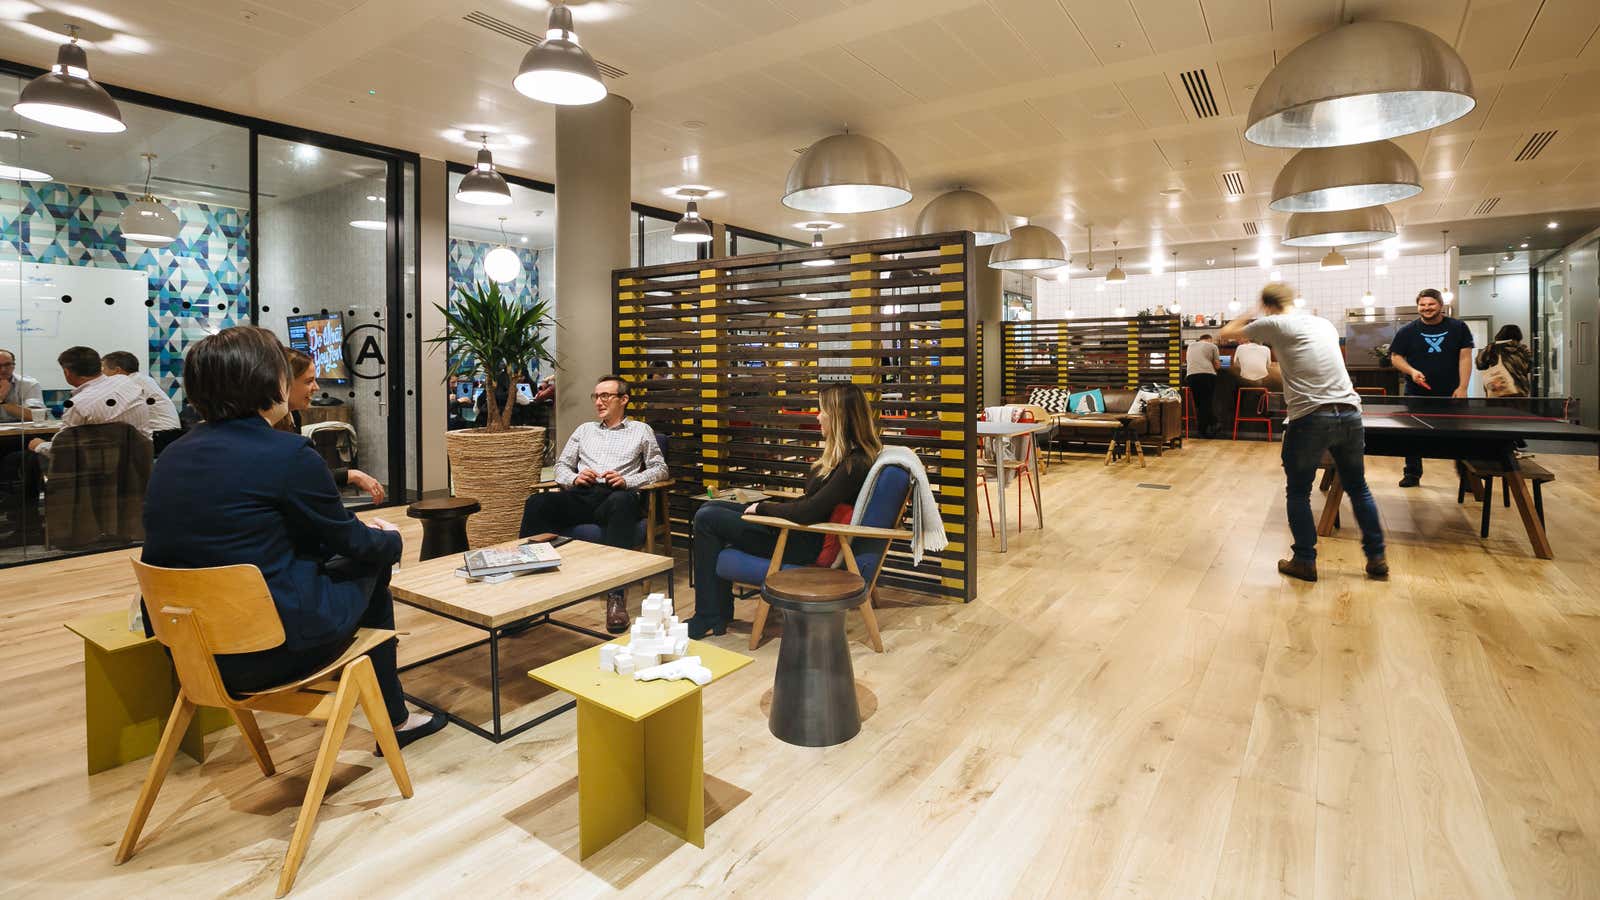 WeWork has quietly launched a fitness business that uses empty spaces in its offices as pop-up studios.